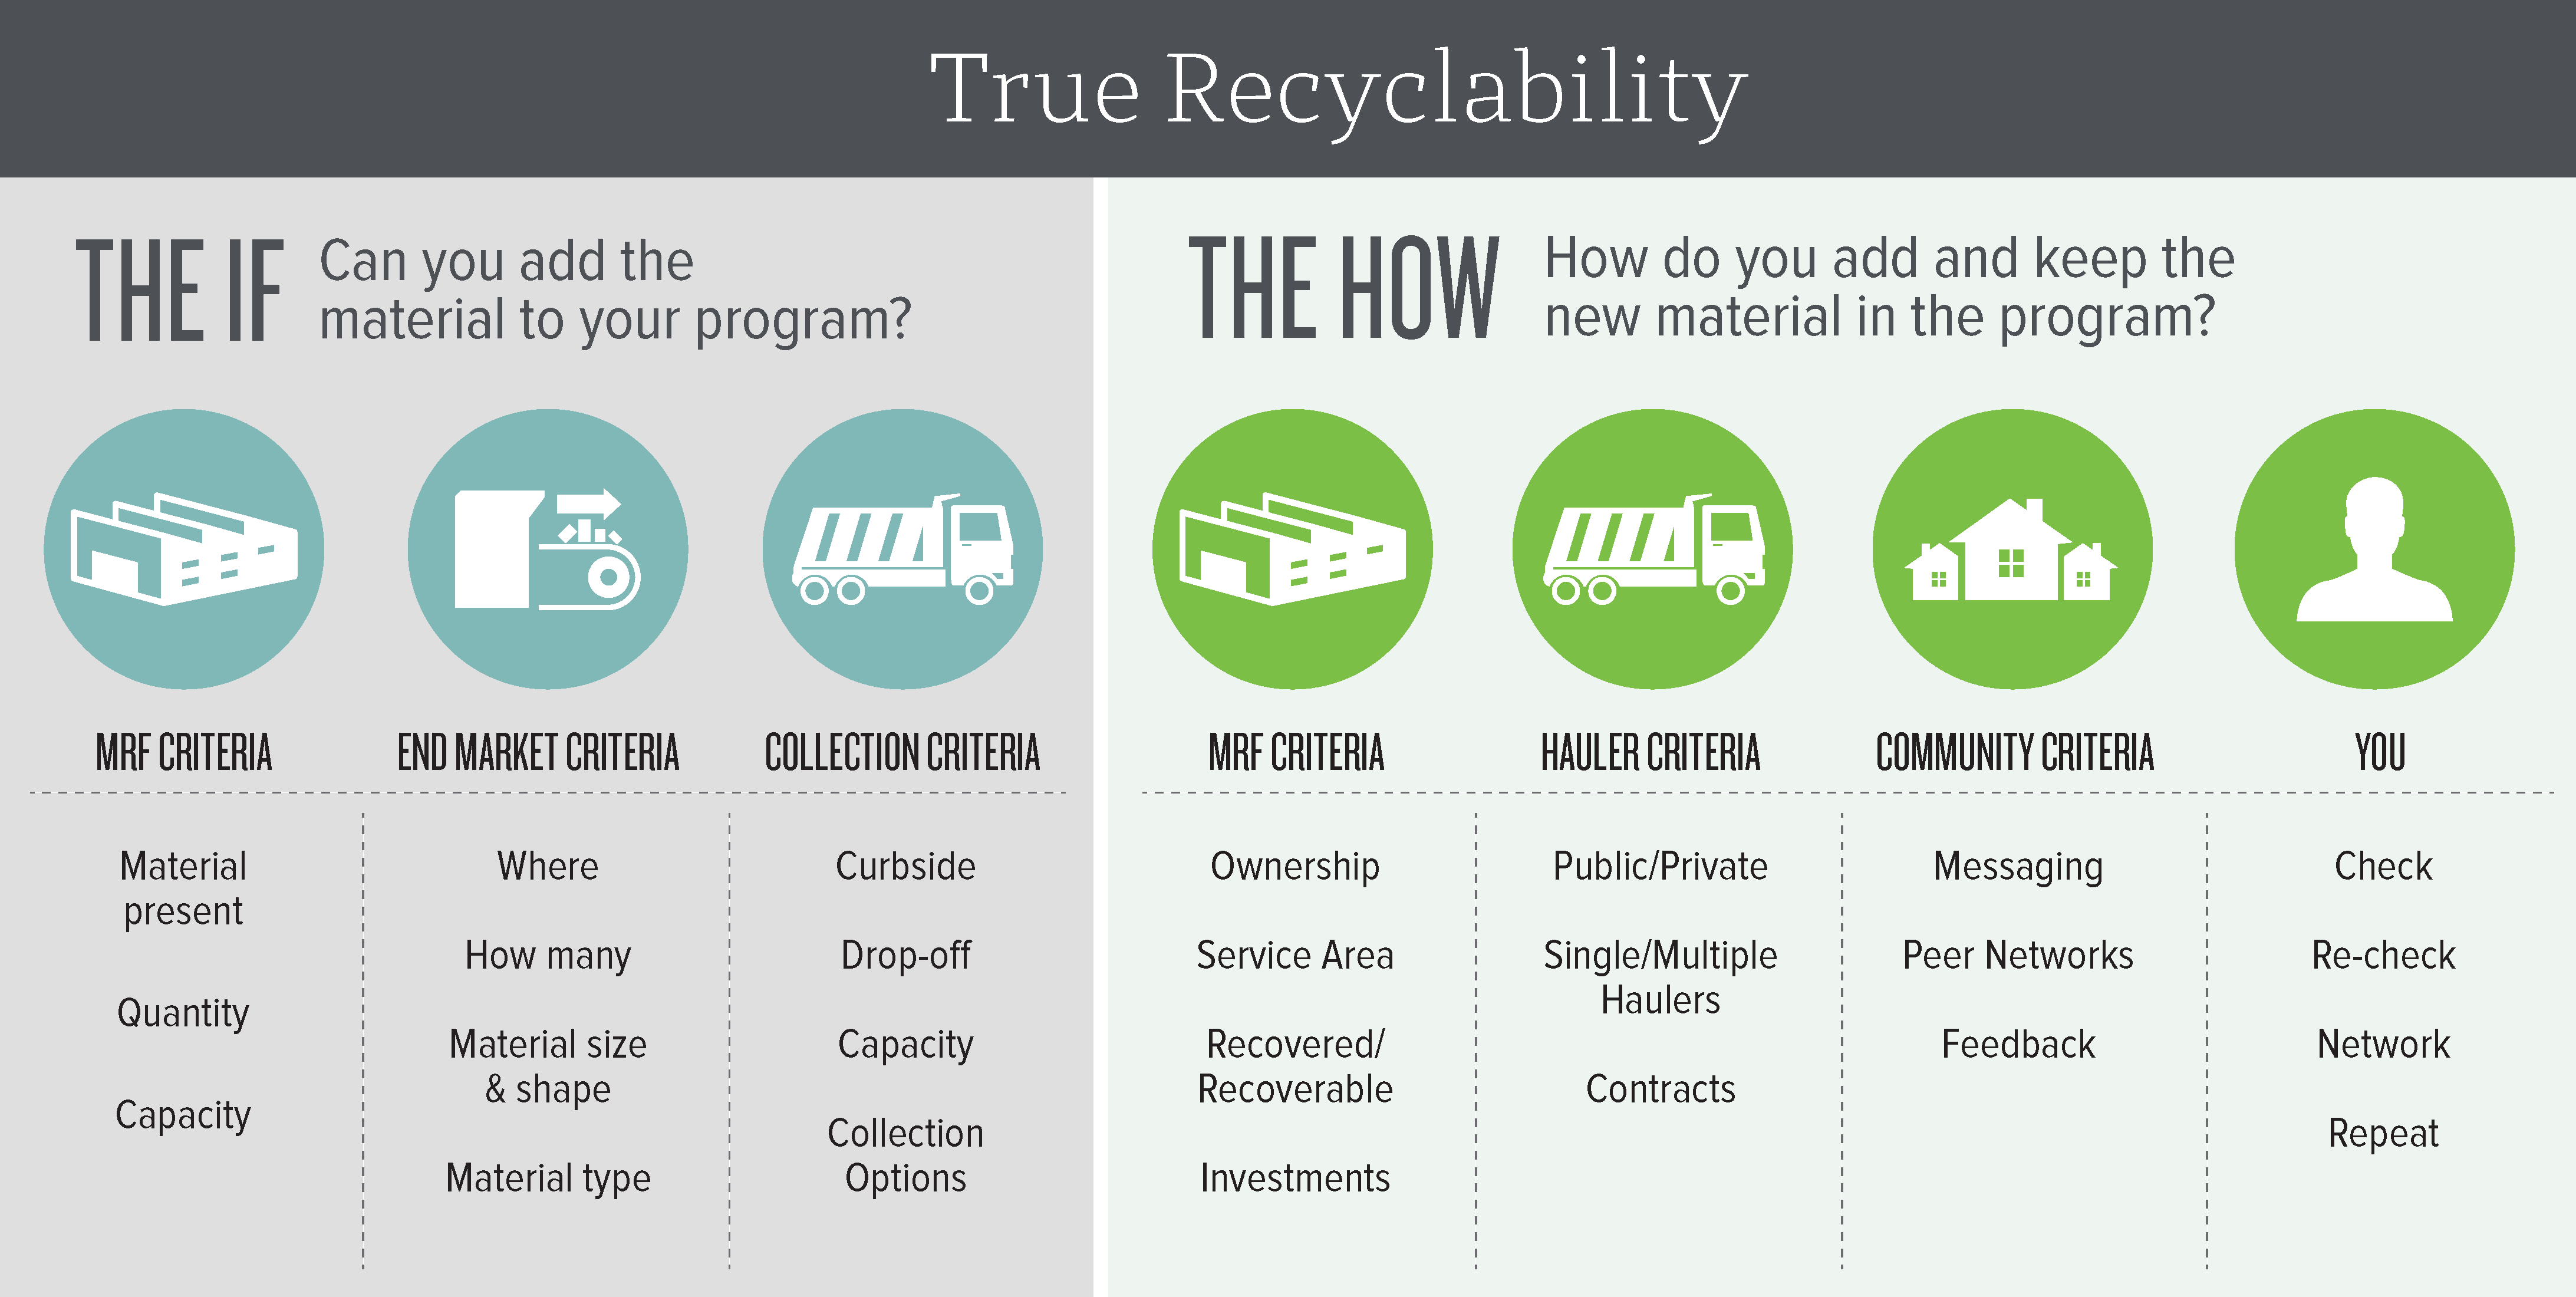 How to Add a Material to Your Recycling Program 